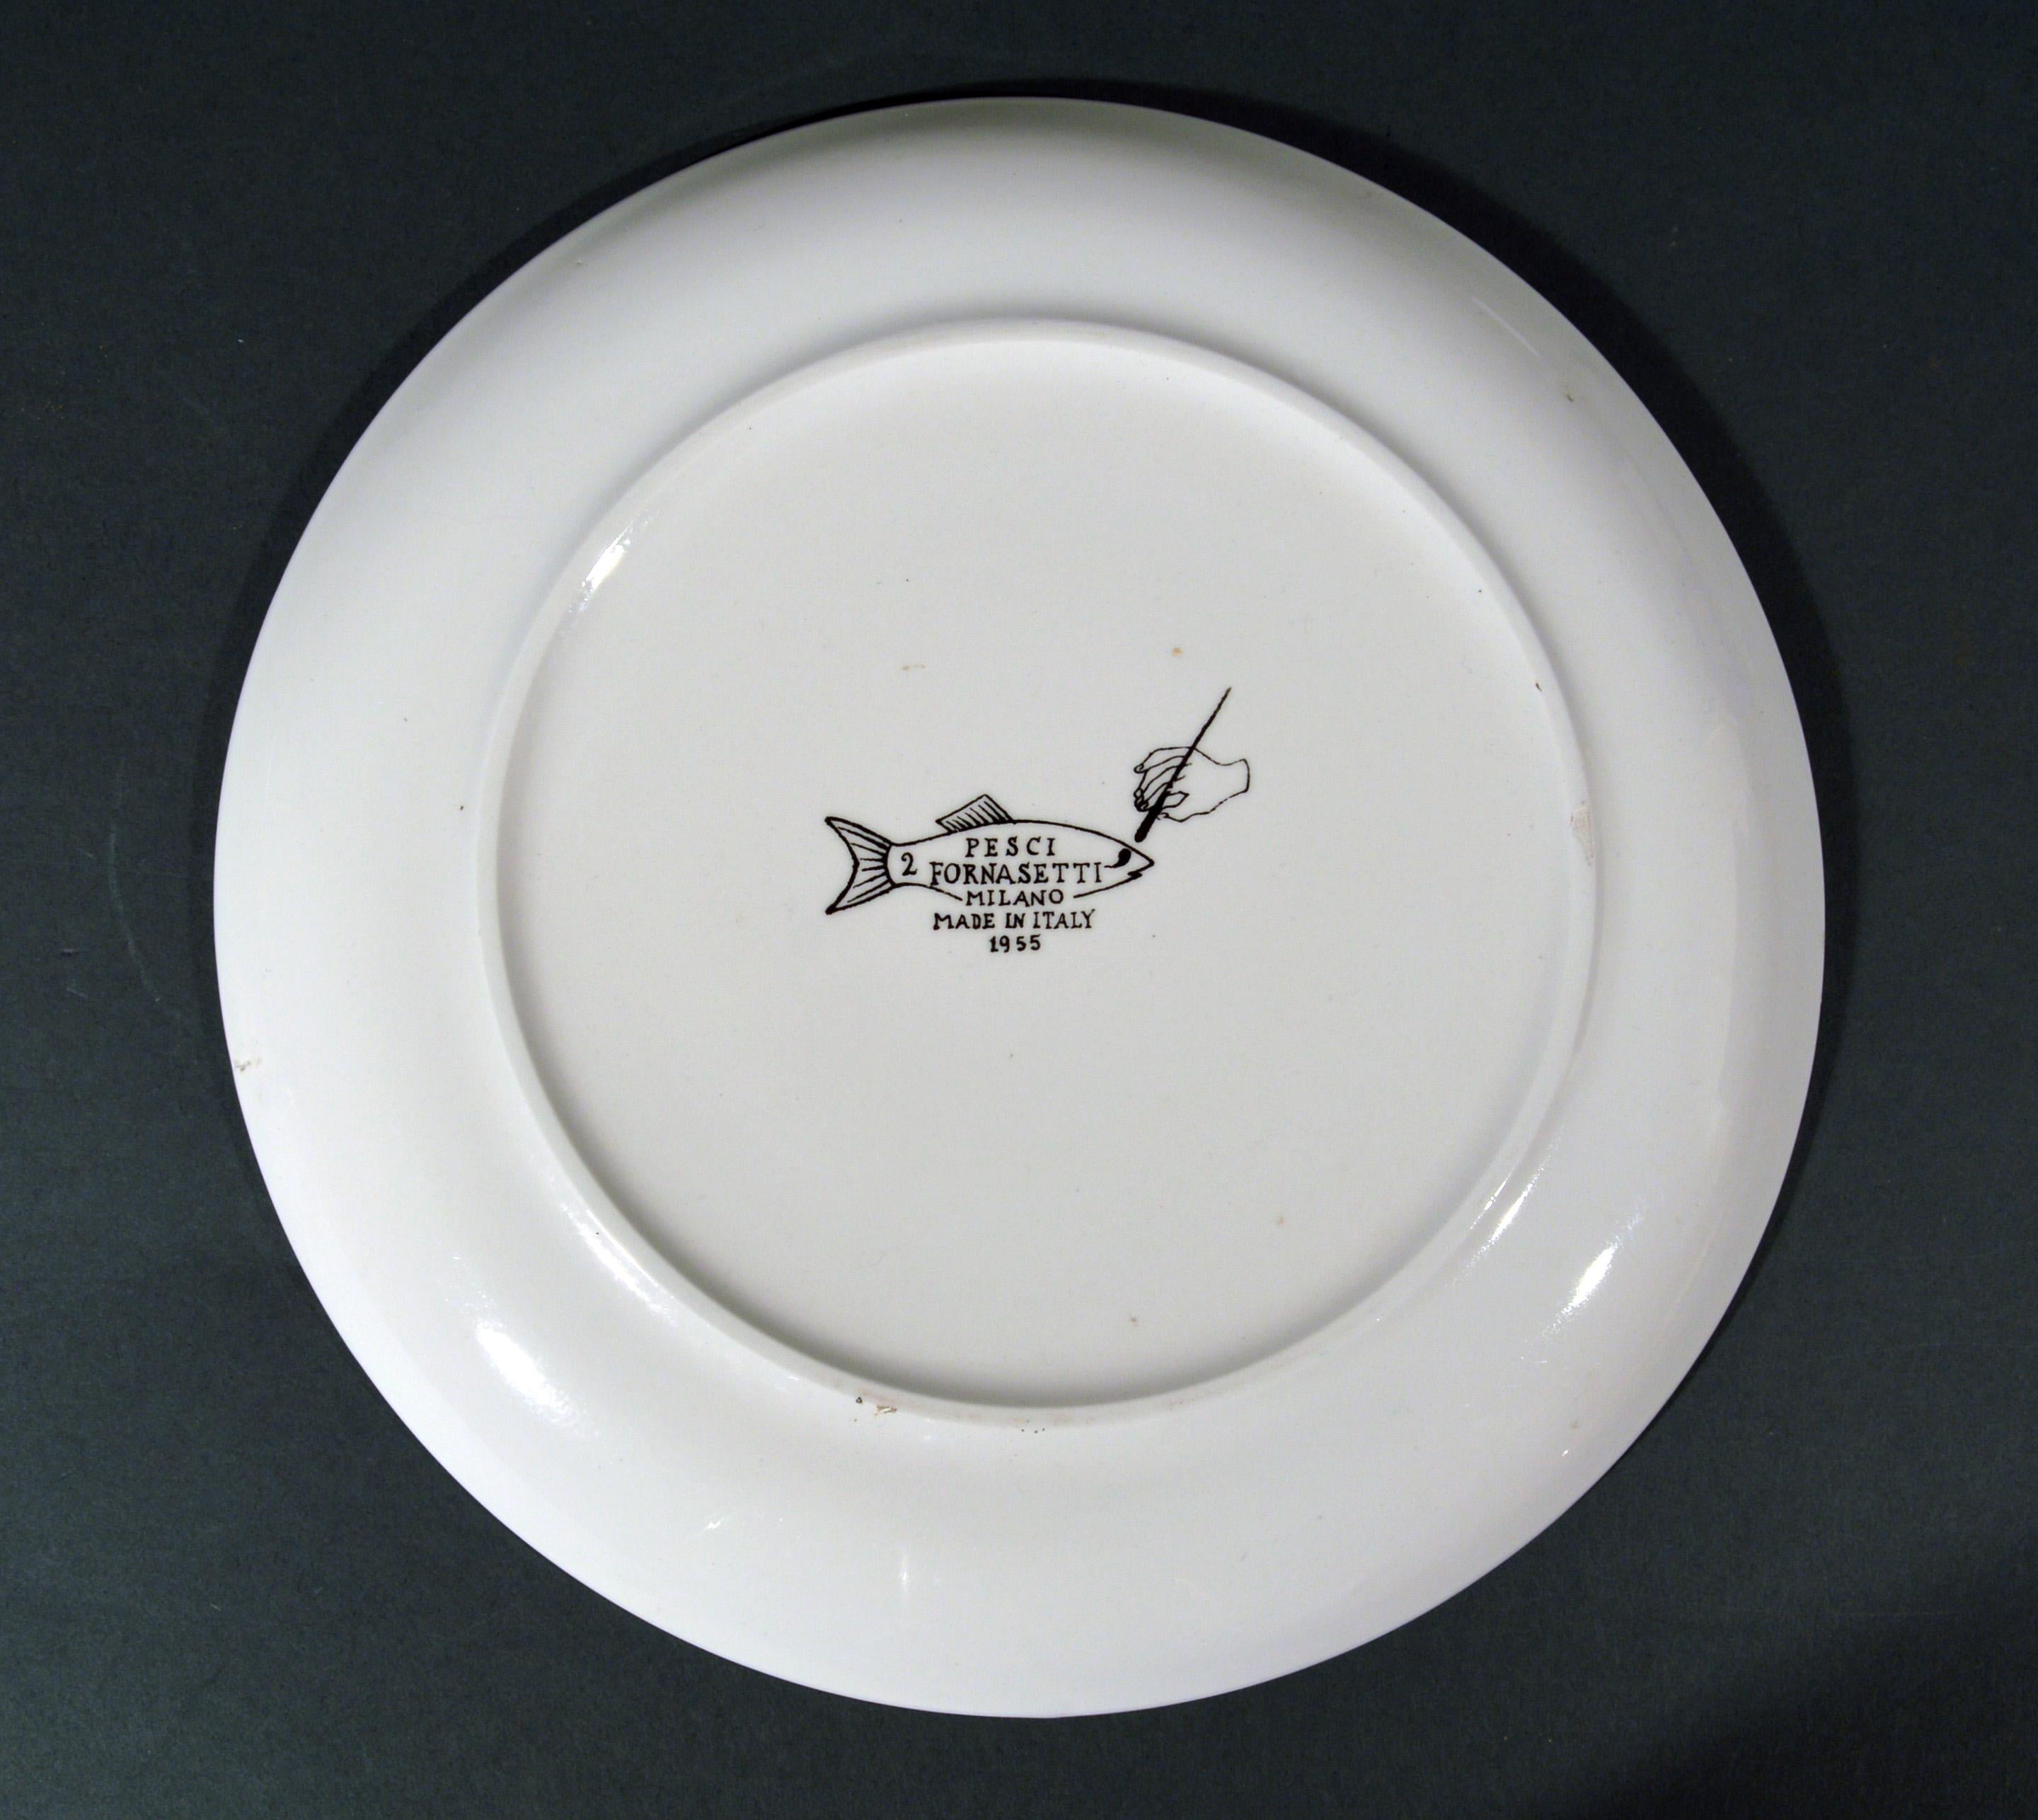 Piero Fornasetti Porcelain Fish Plates, Pesci pattern or Passage of Fish For Sale 1